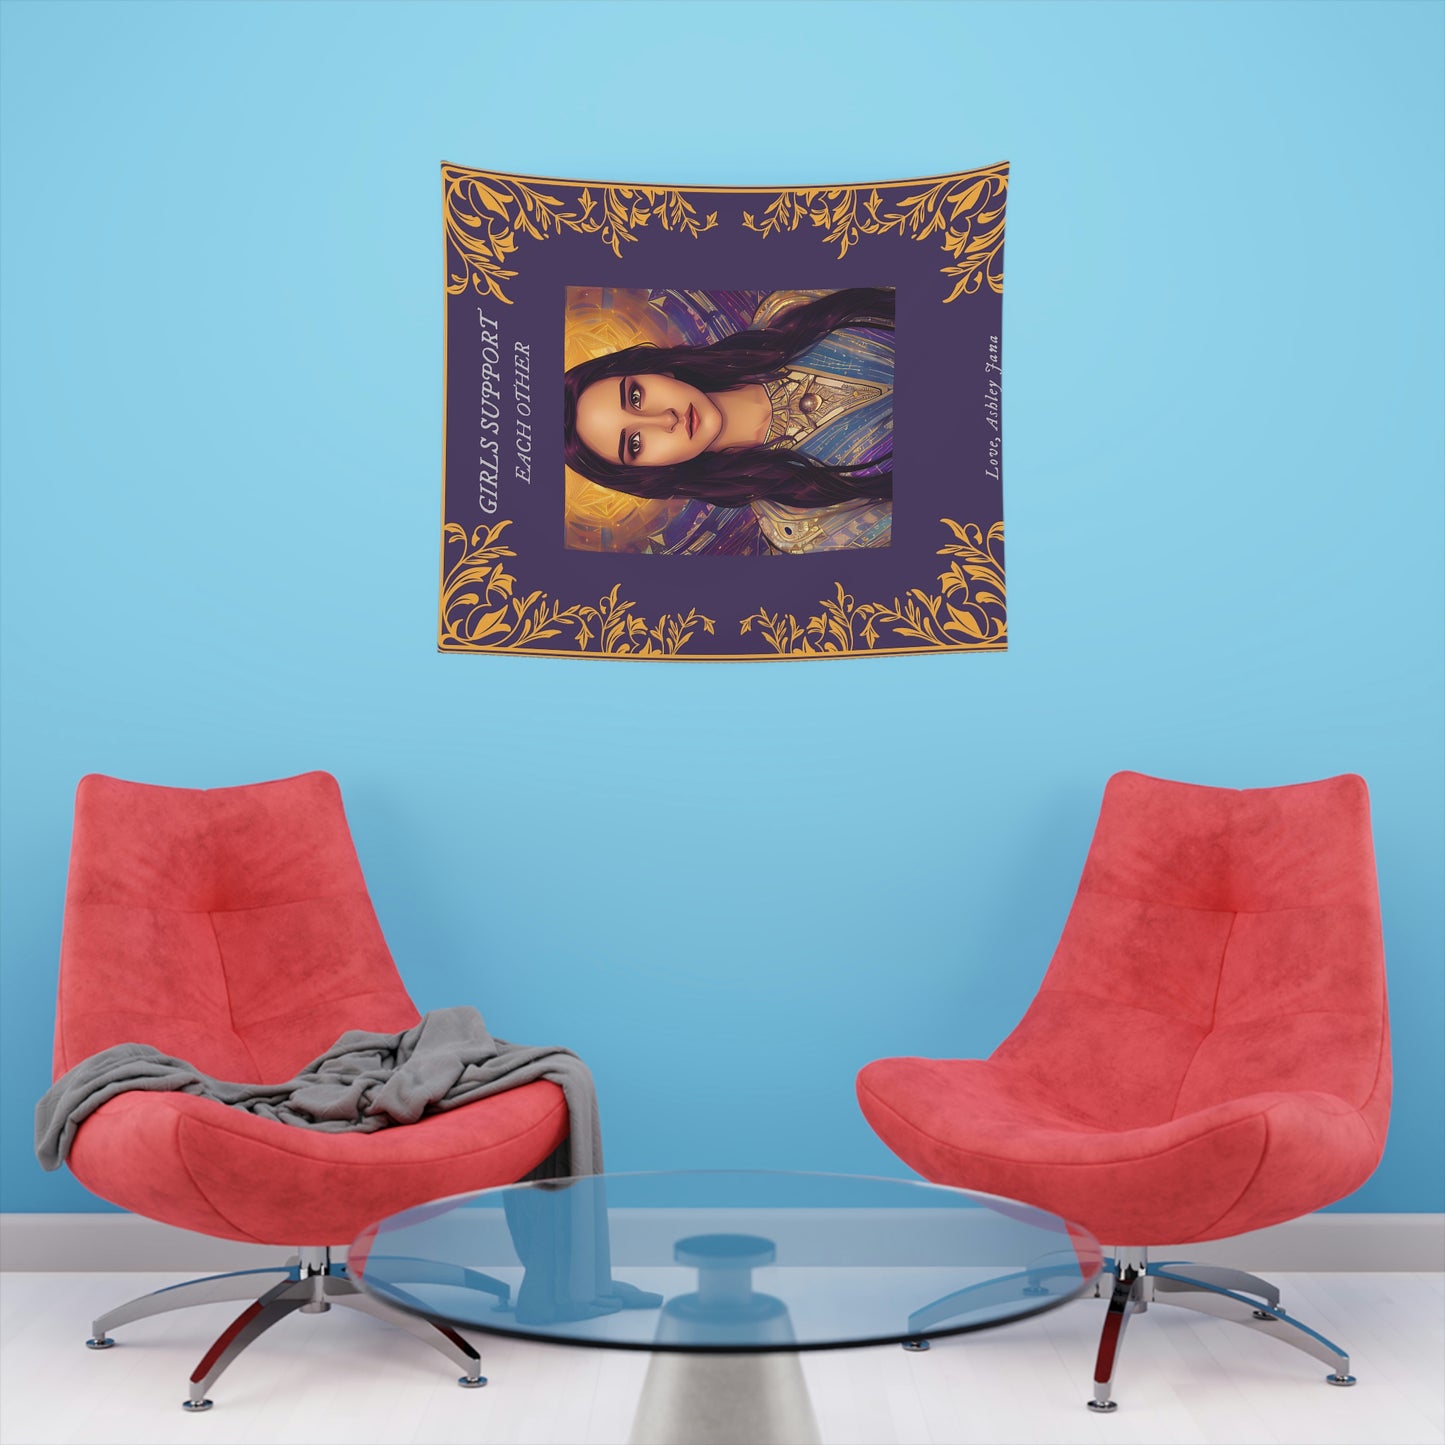 Girls Support Each Other Printed Wall Tapestry